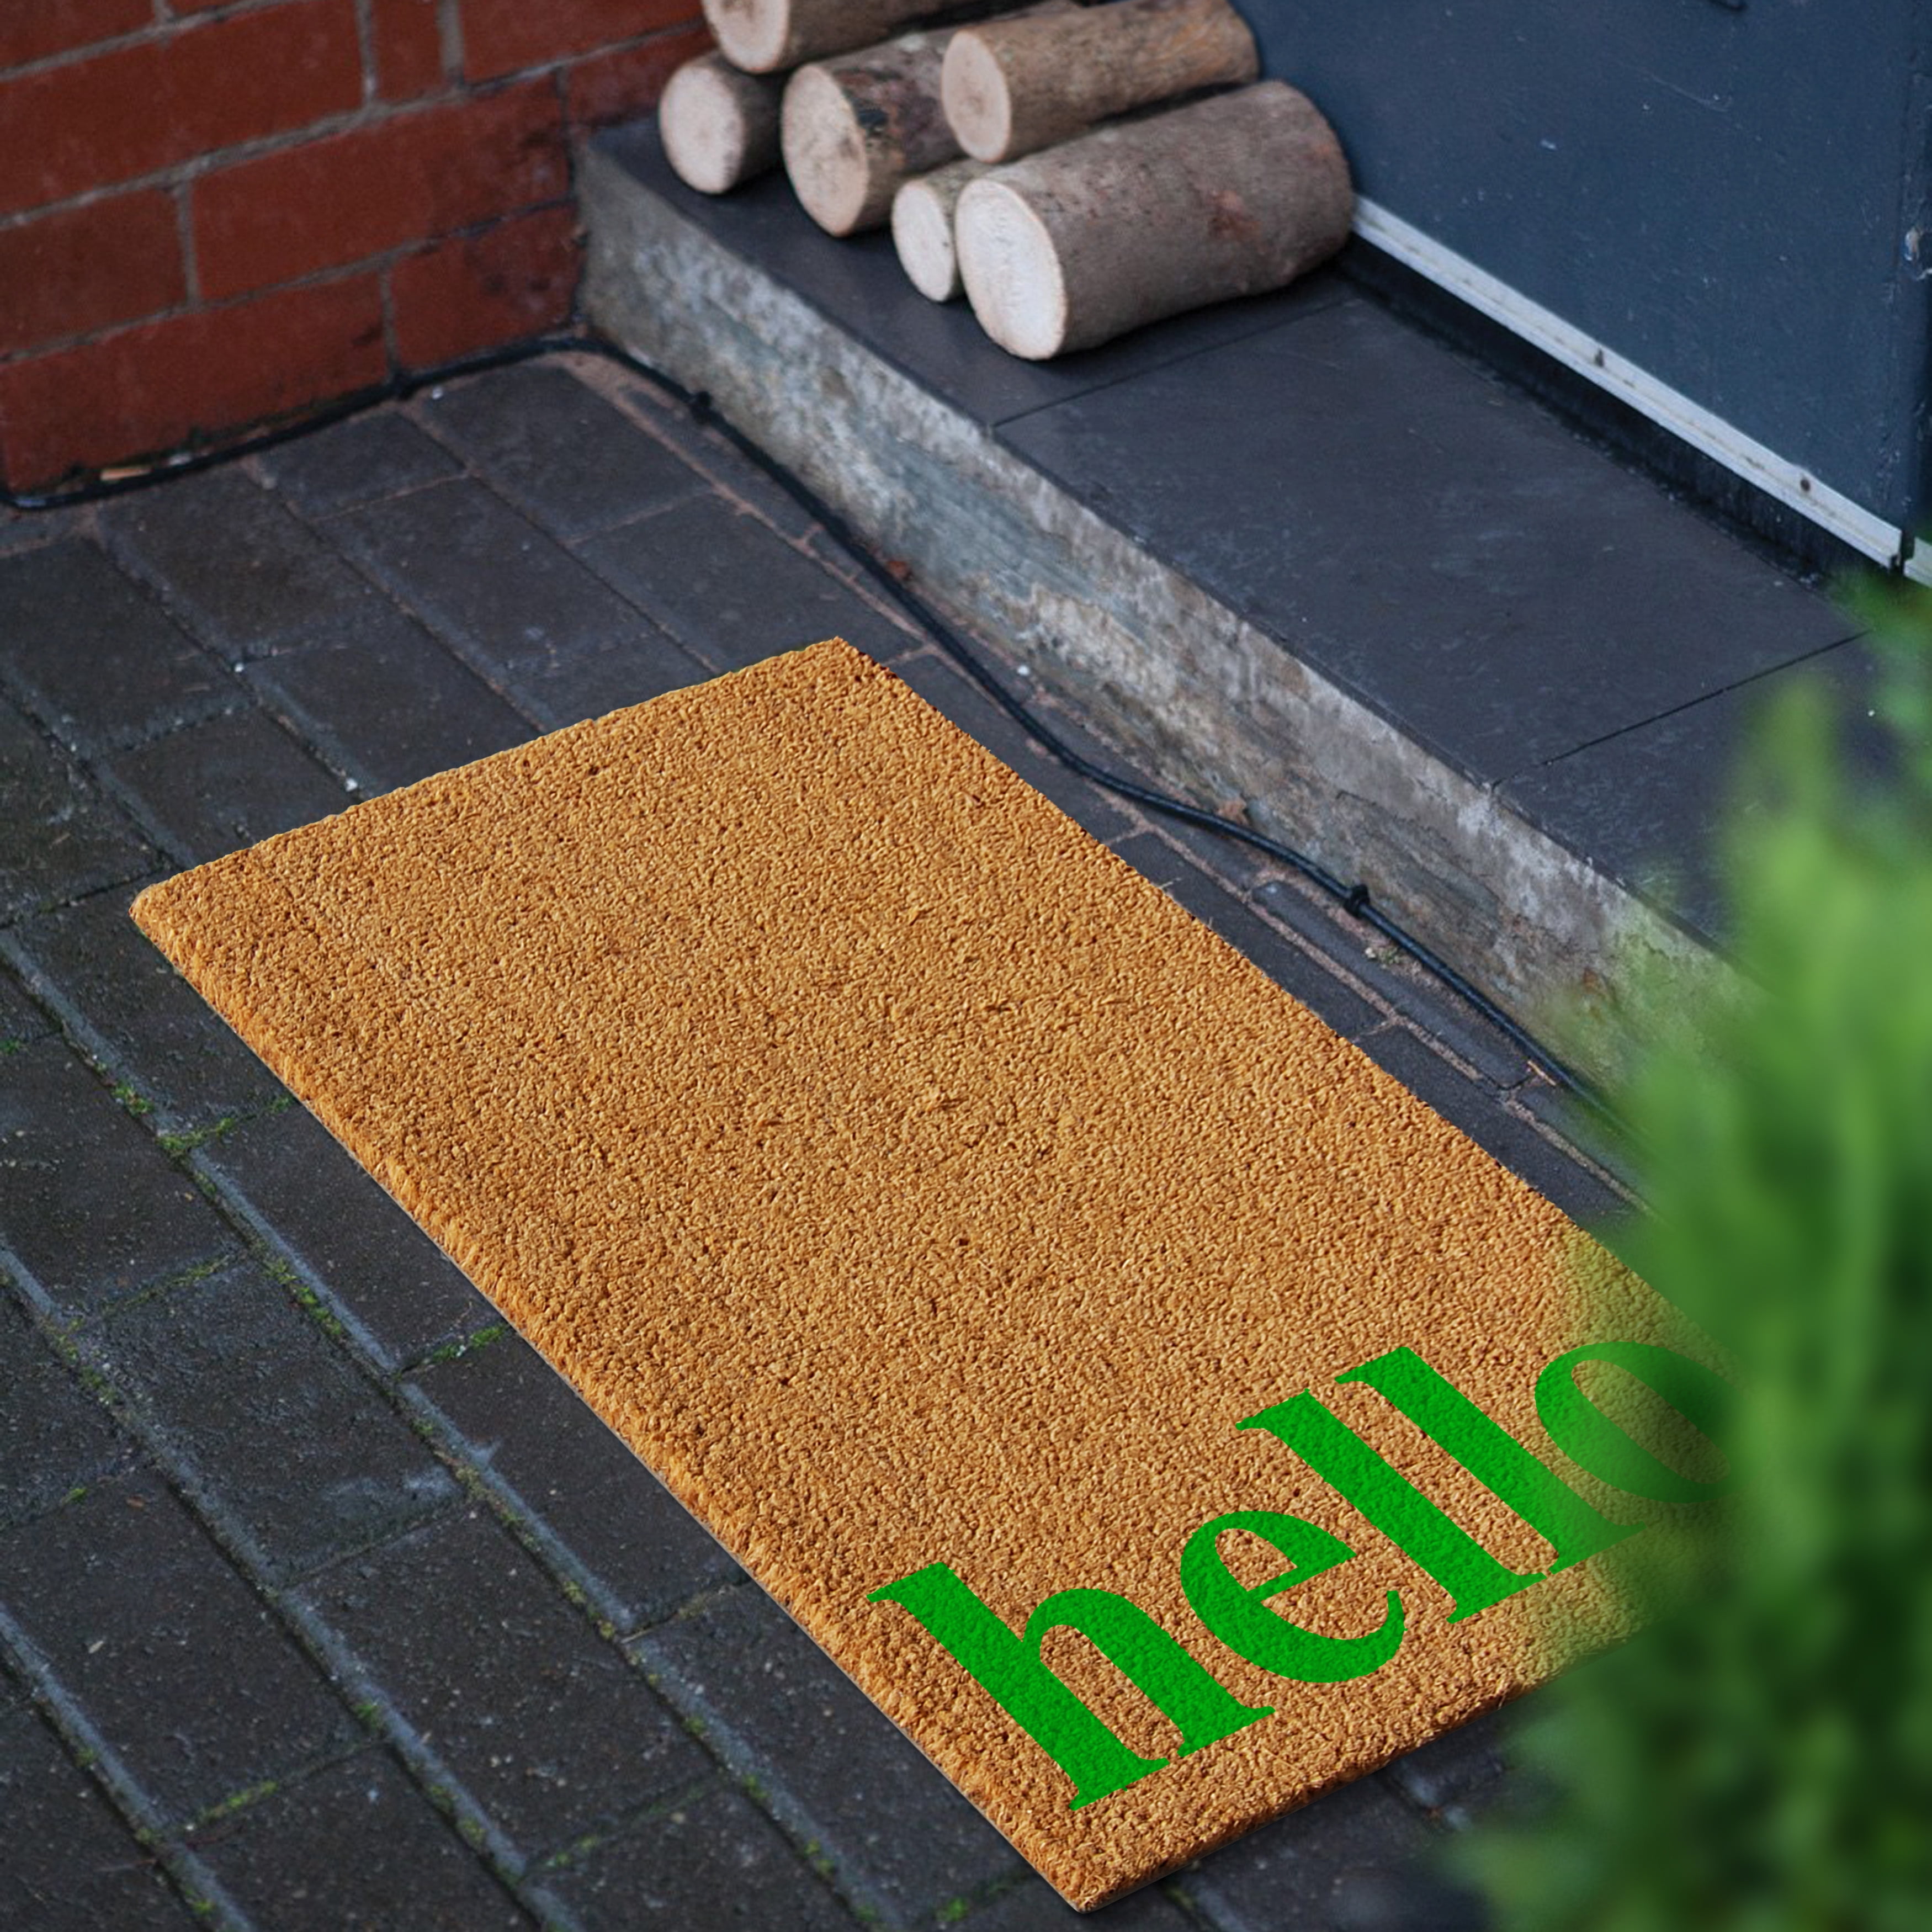 Entryways Ellipse Recycled Rubber/Coir Doormat (24 Inches x 36 inches)